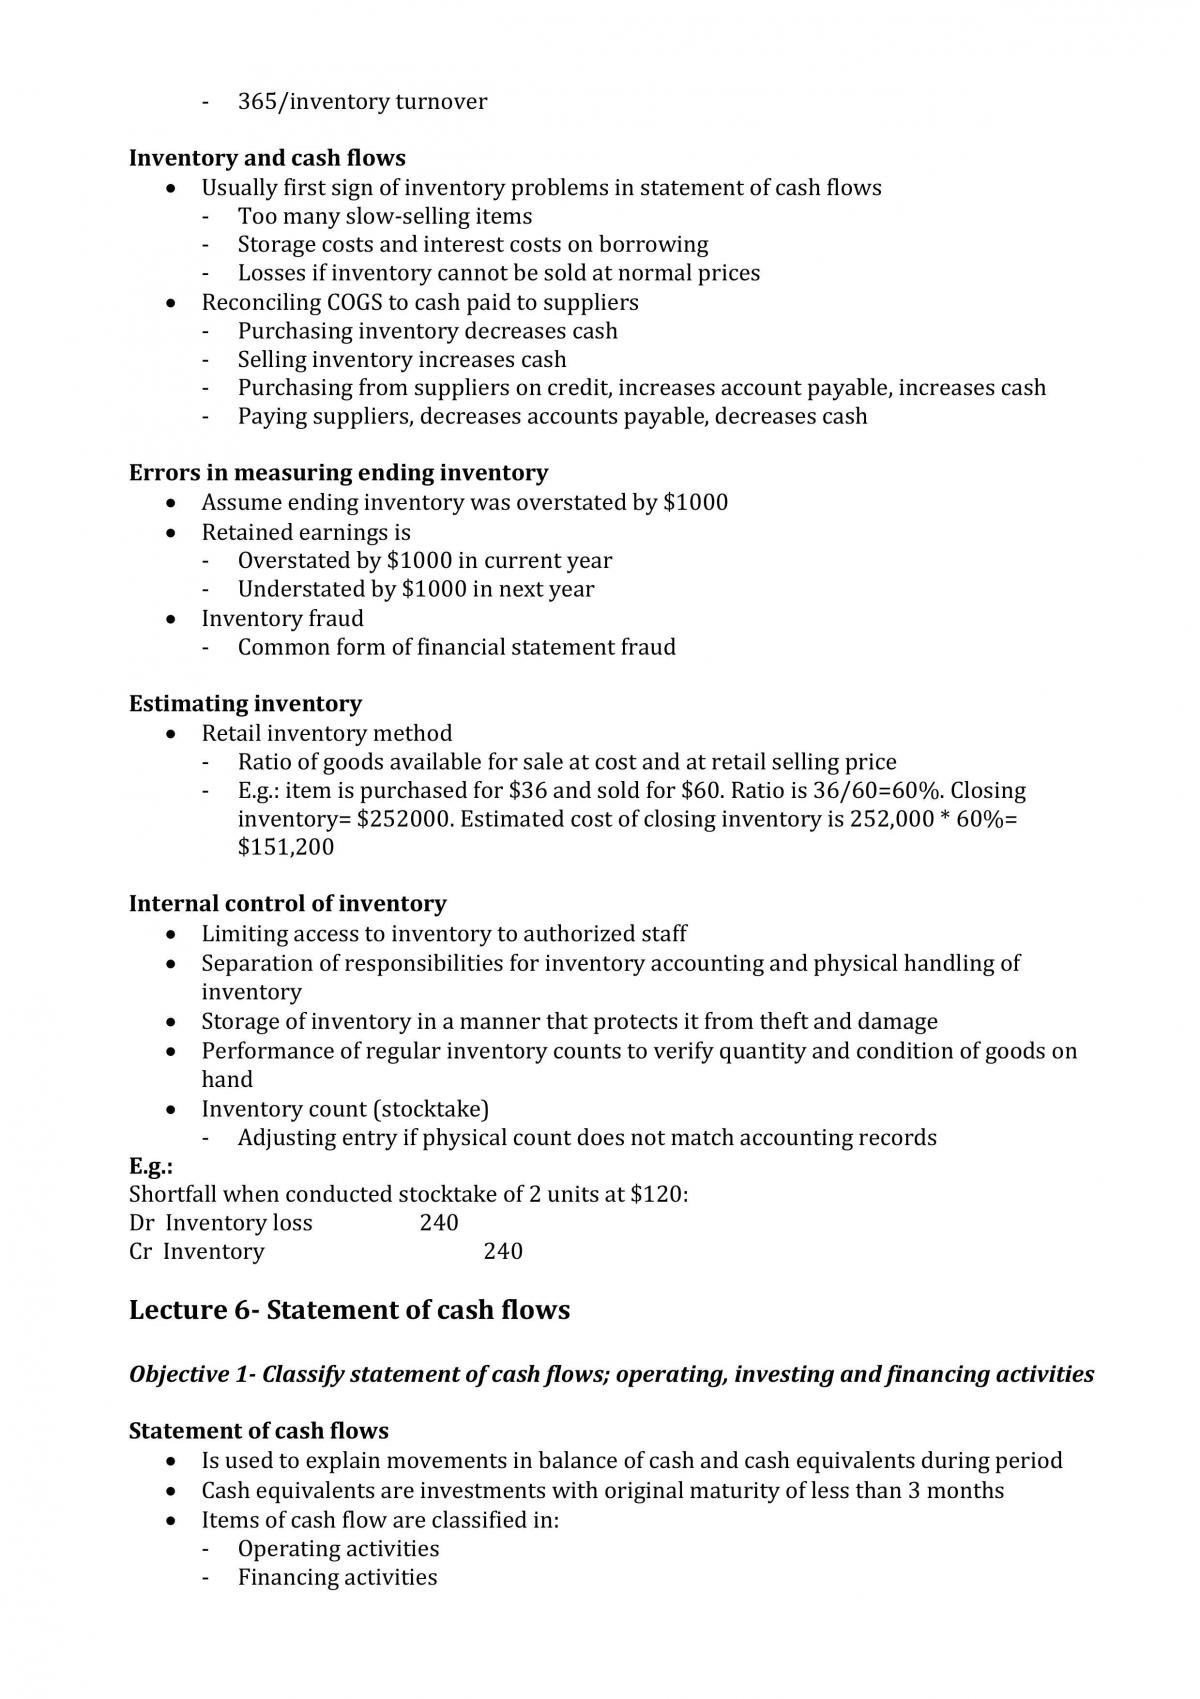 Accounting for Business Decisions A (ABDA) Complete Study Notes - Page 24